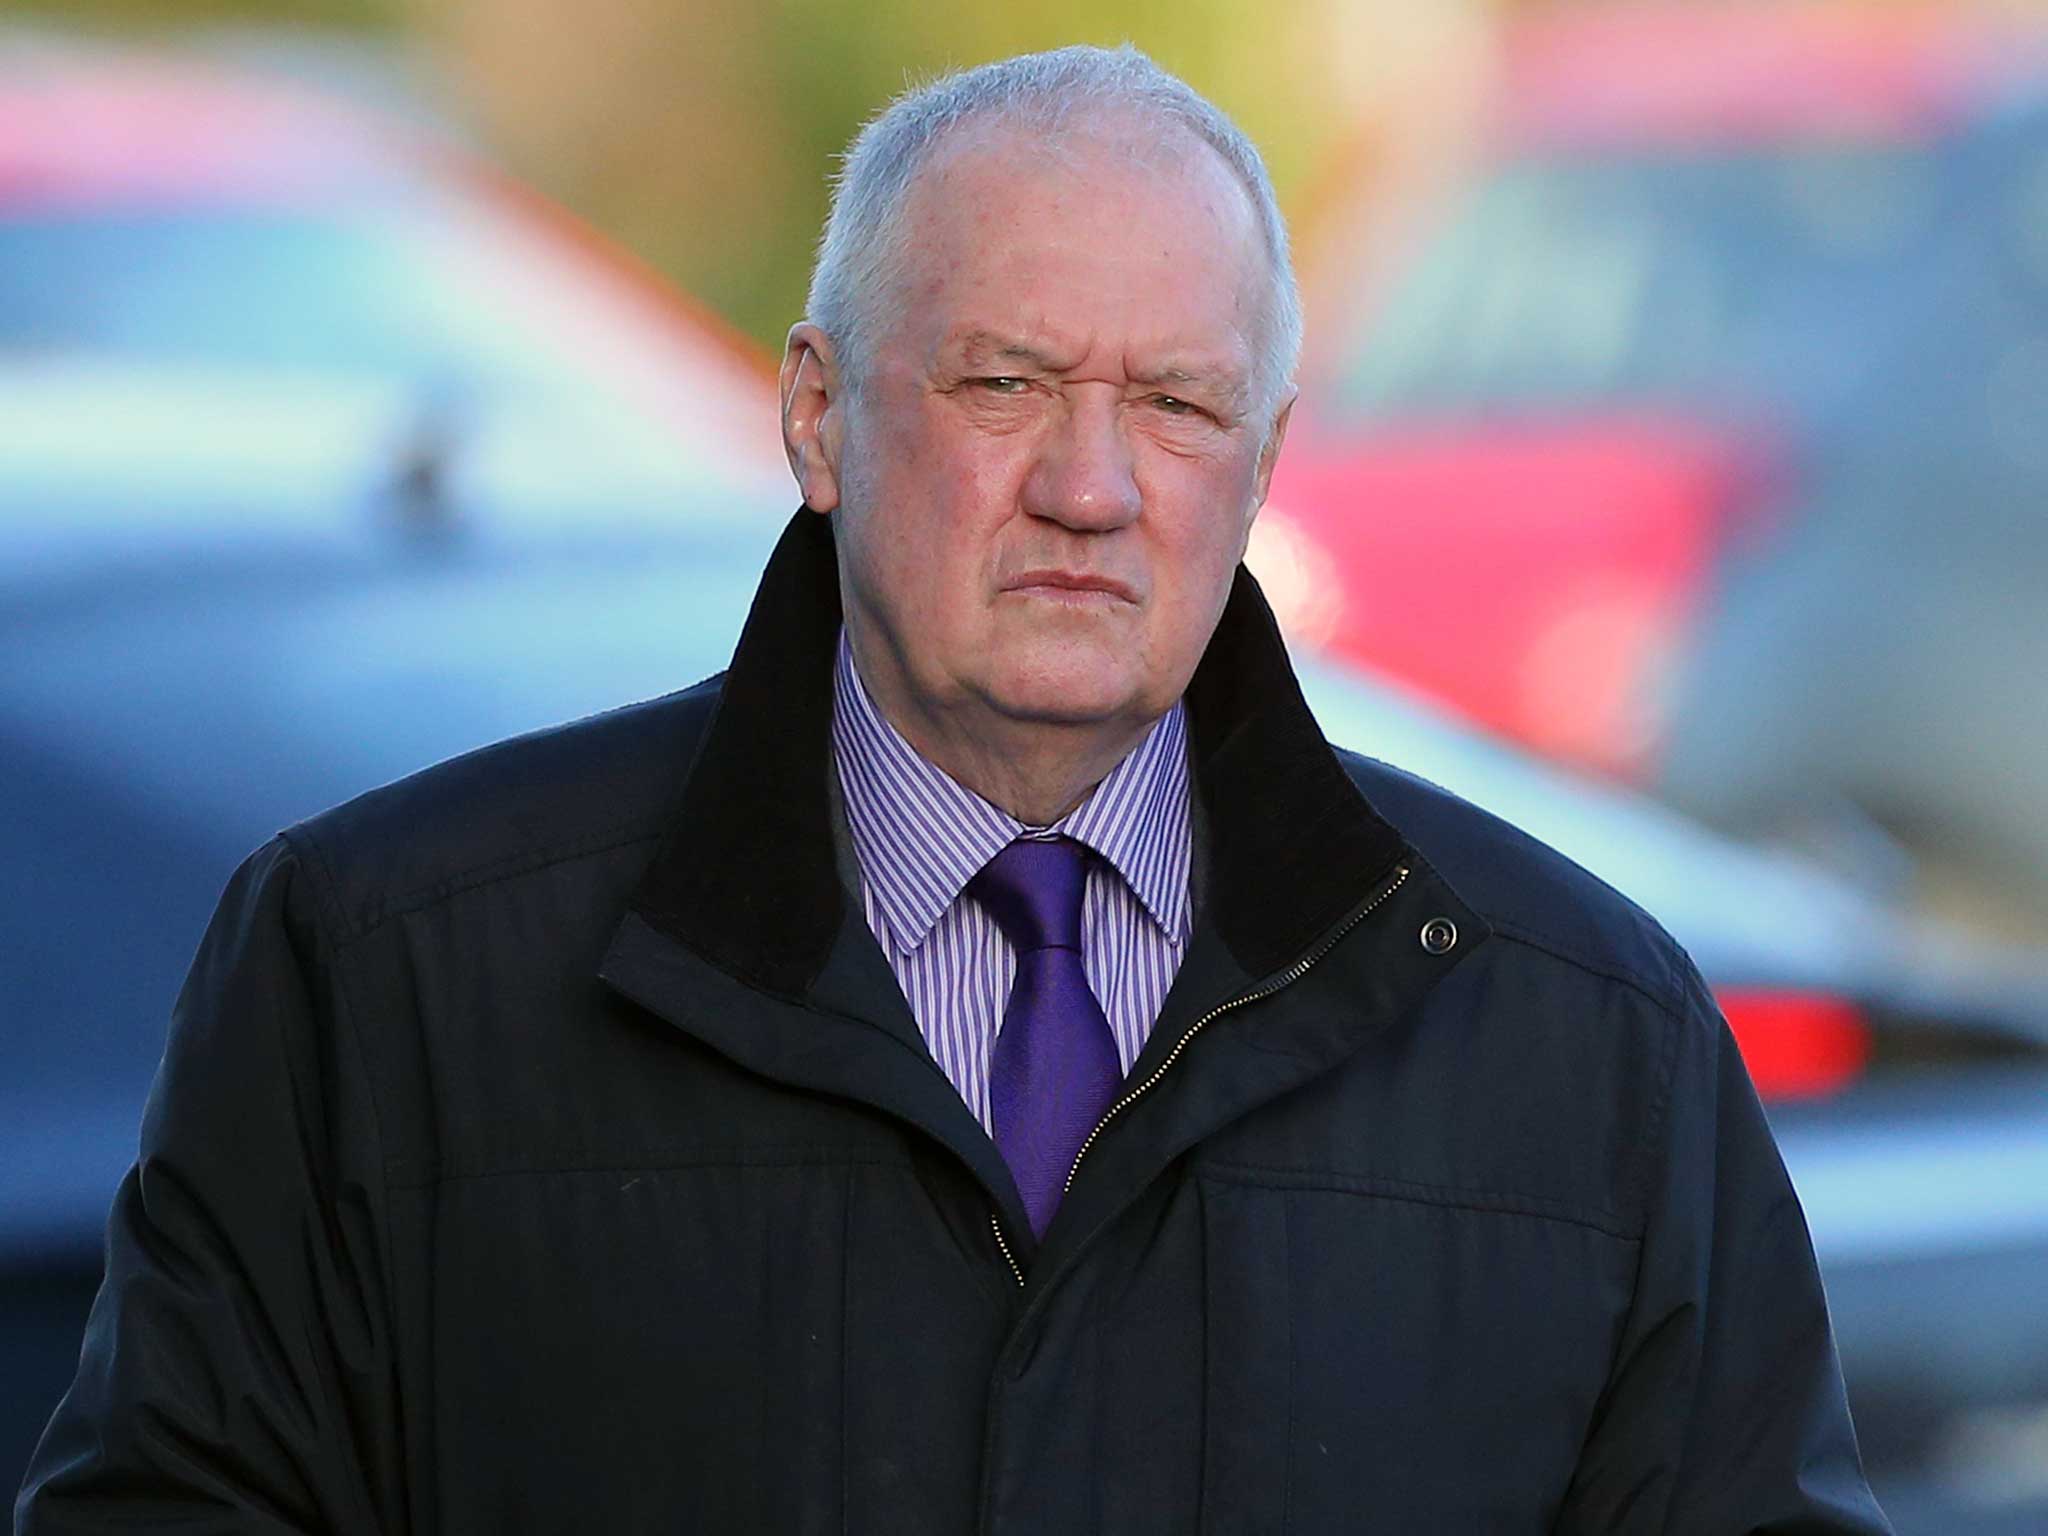 Hillsborough match commander David Duckenfield is applying for the charges against him to be dismissed